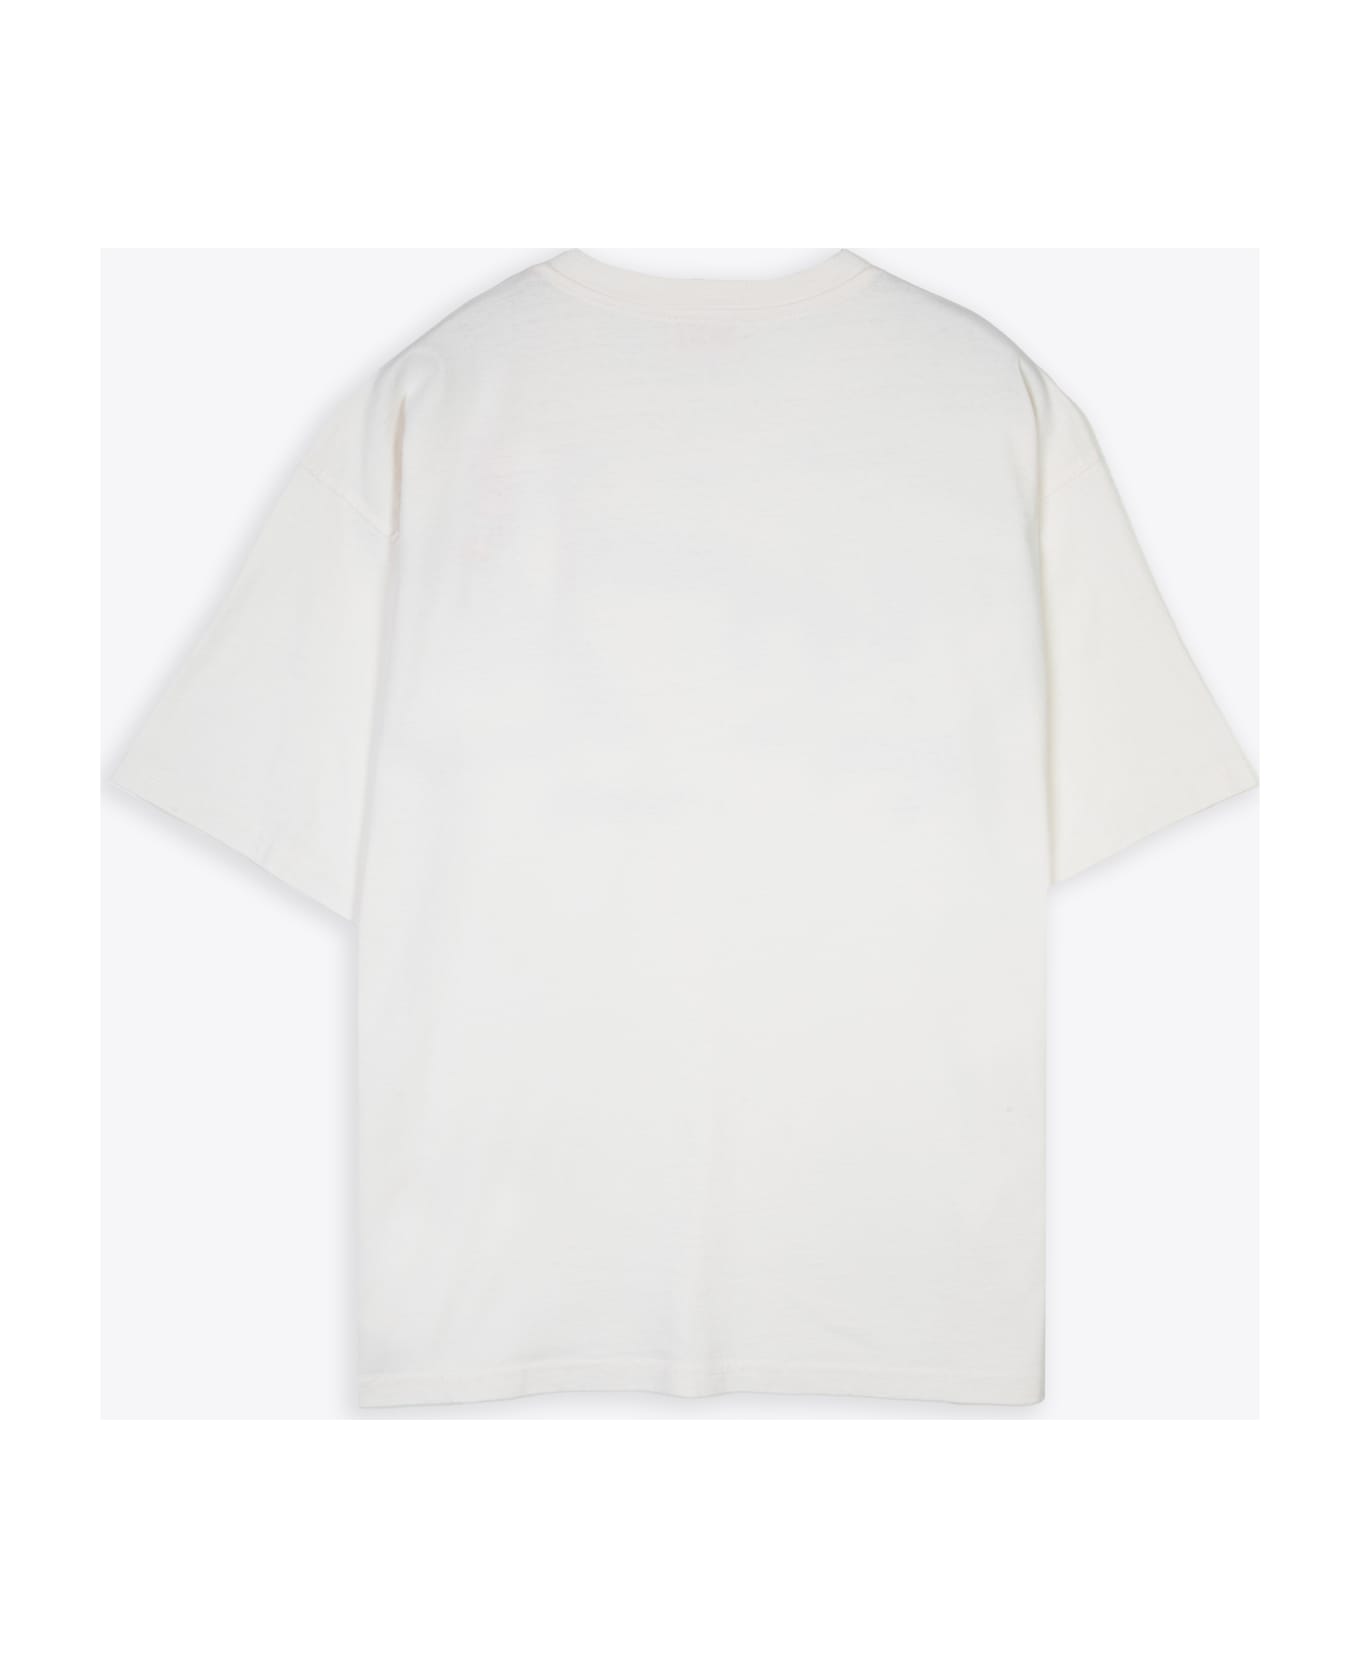 Diesel T-boxt-n14 Off white cotton t-shirt with flock logo print - T Boxt N14 - Panna/nero